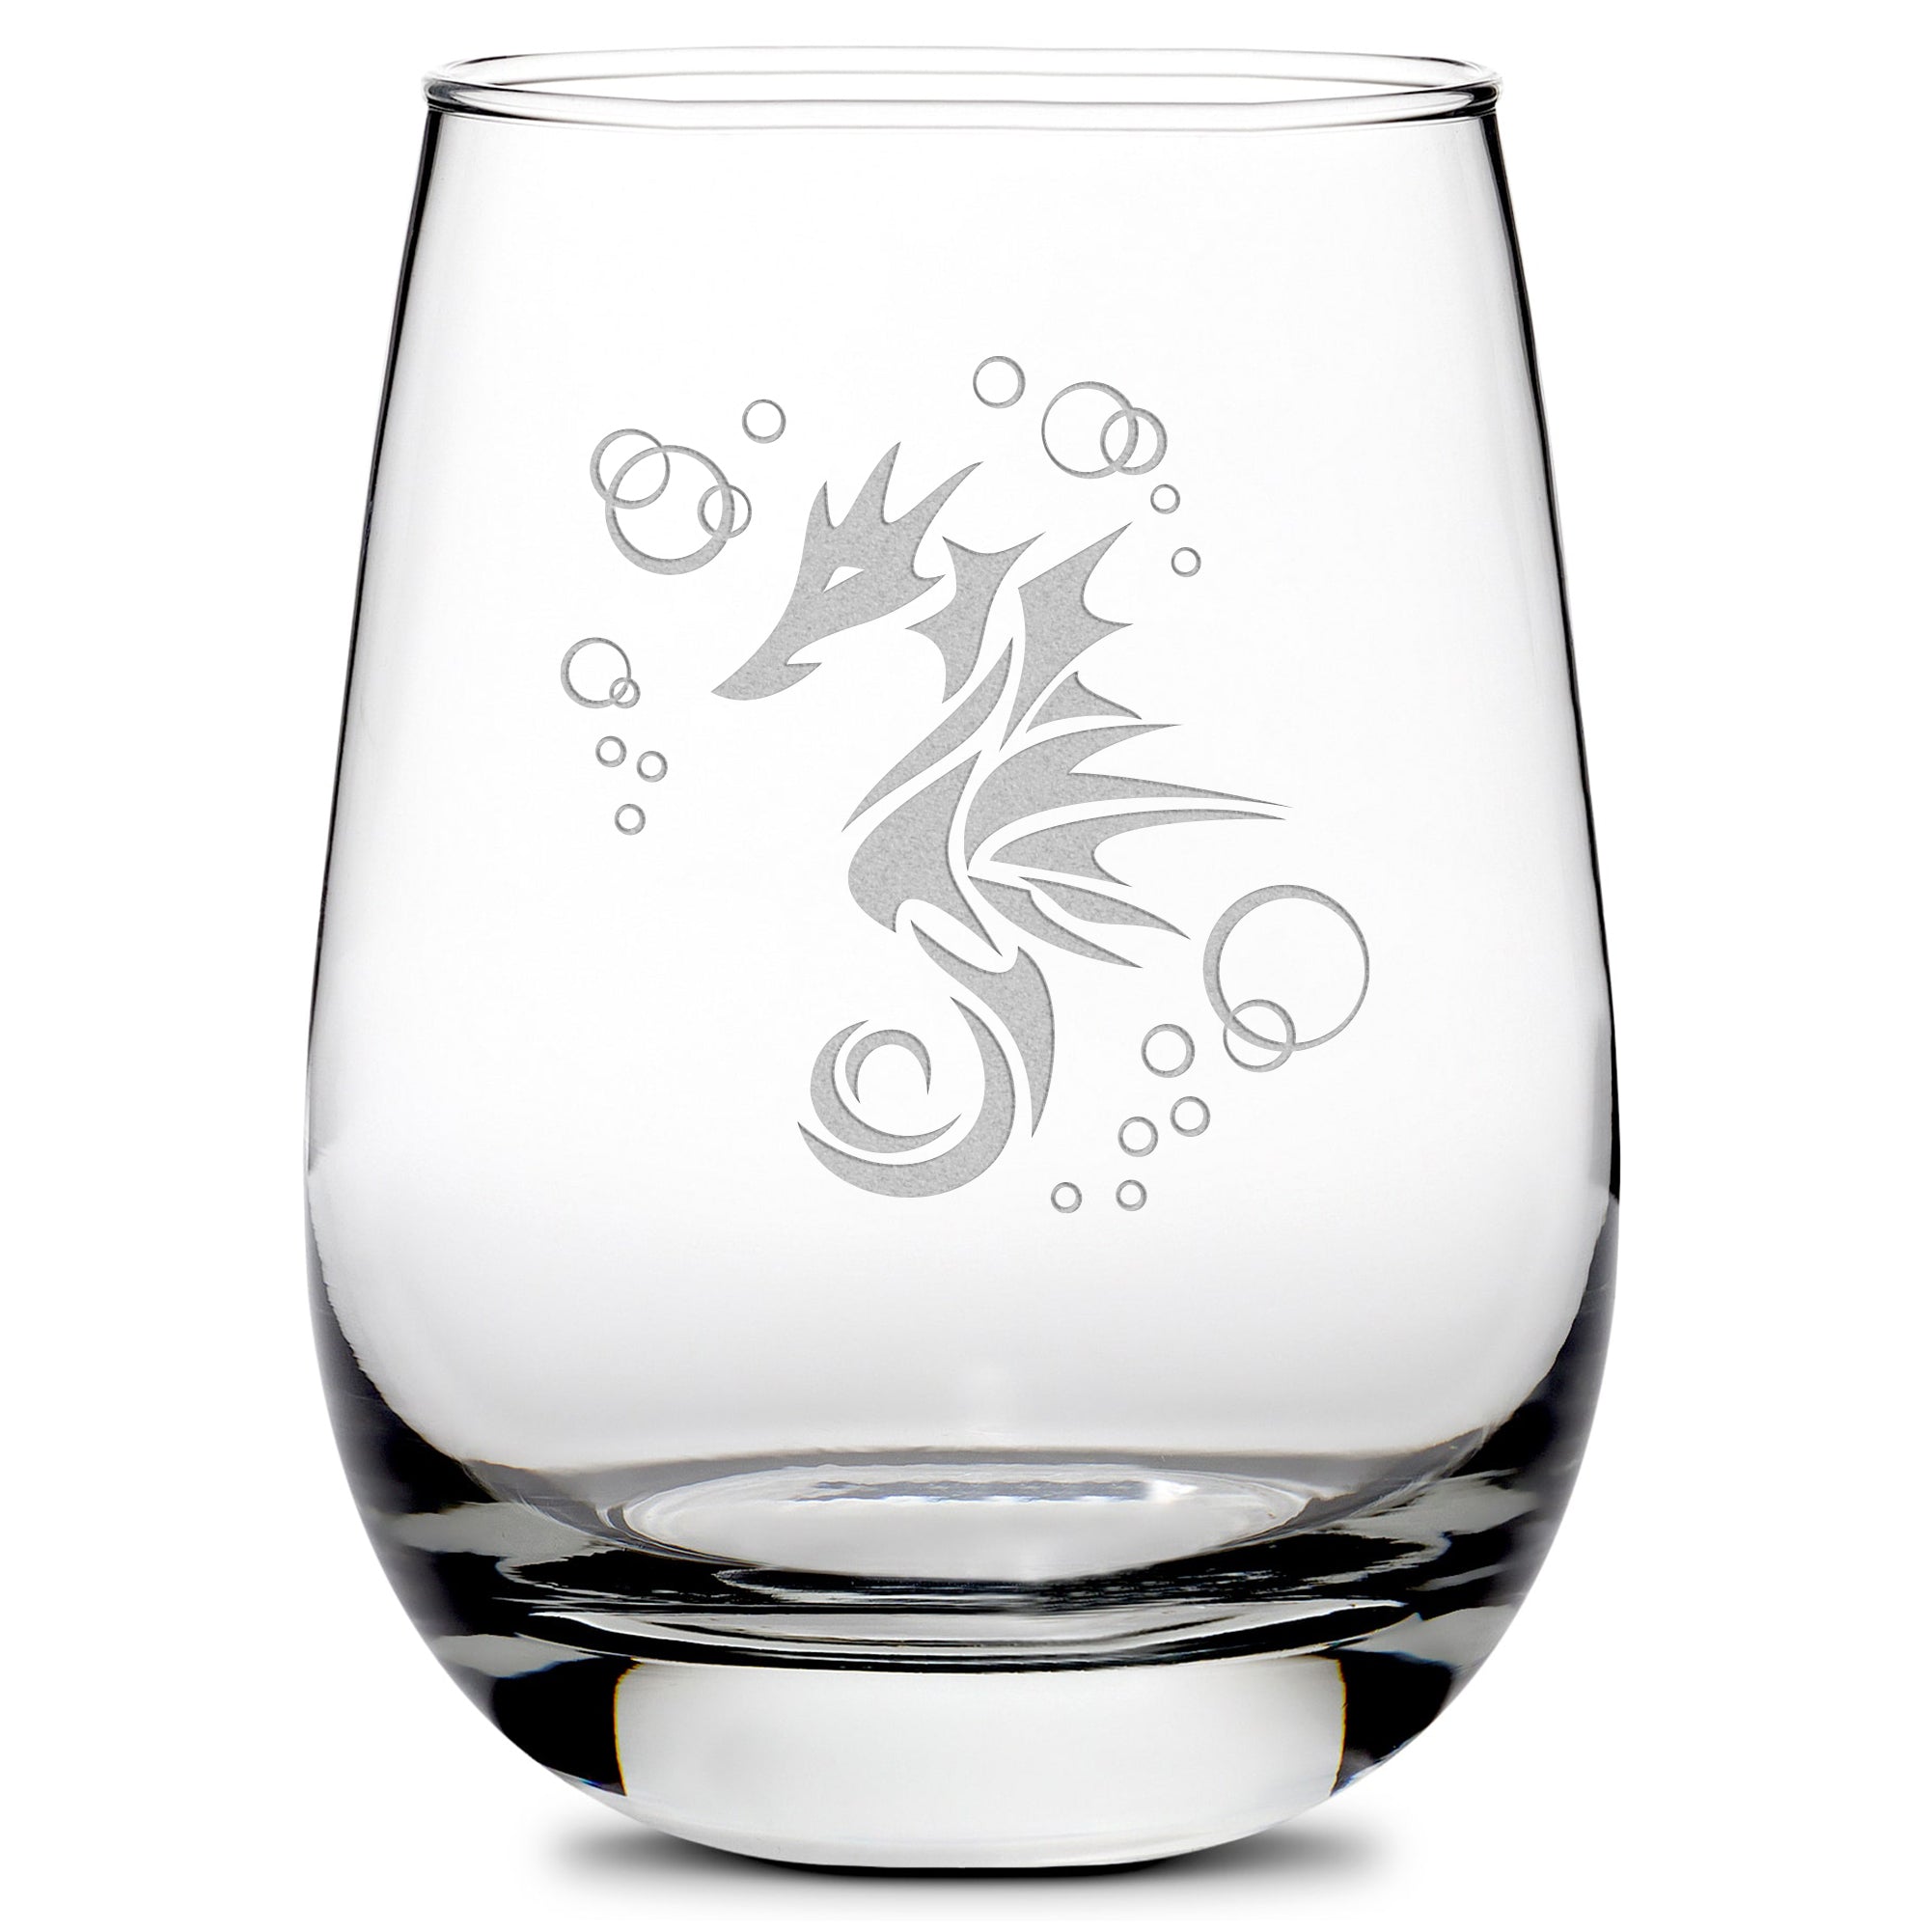 Premium Wine Glass, Seahorse Design, 16oz, Laser Etched or Hand Etched